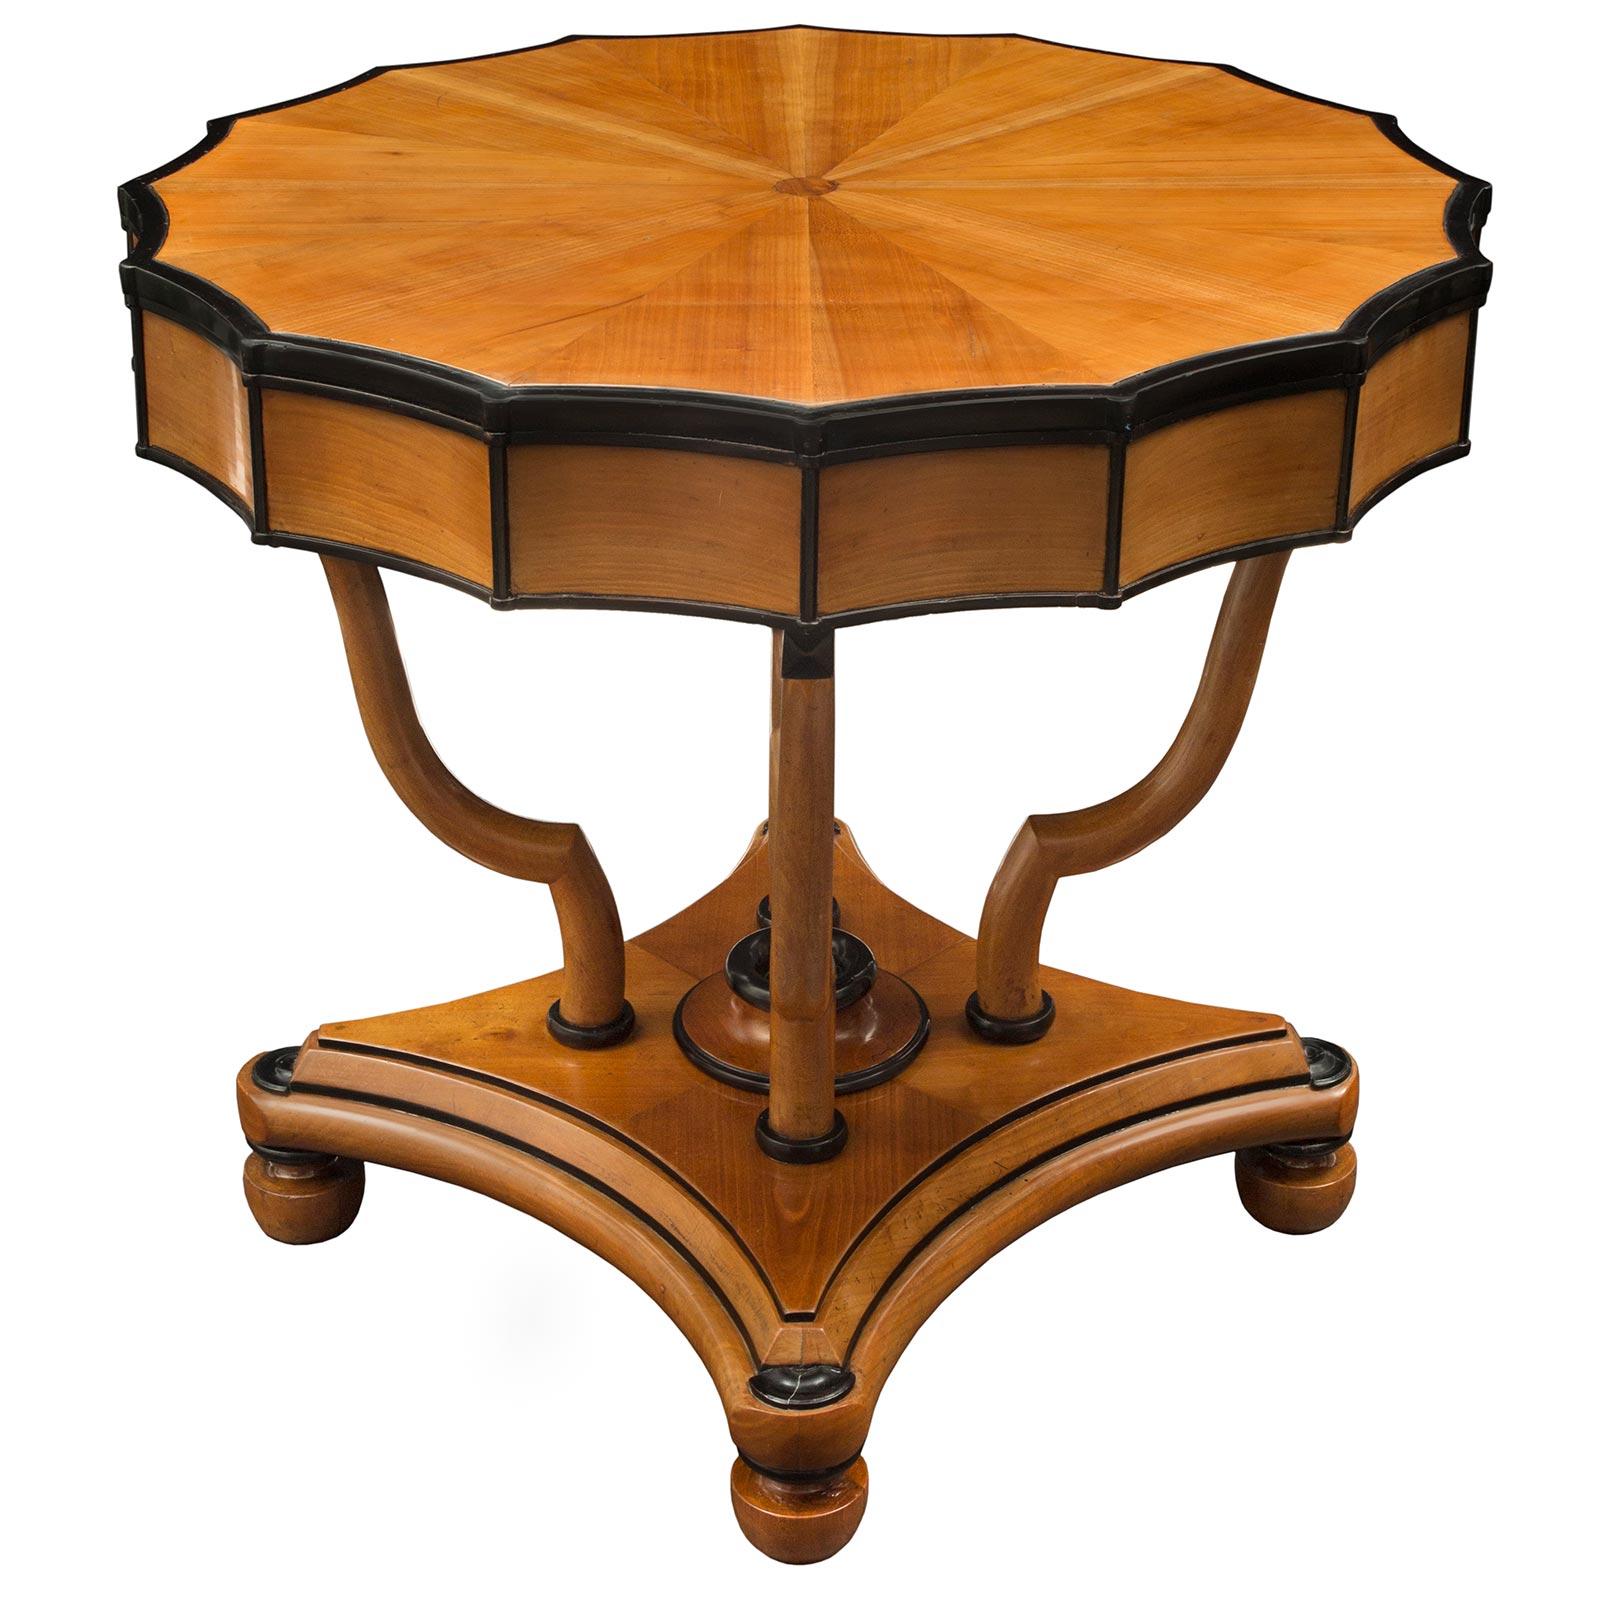 An exceptional and uniquely shaped Italian early 19th century Neo-Classical st. cherry and ebony side table. The table is raised by a square mottled support with concave sides and decorative half round rosettes at each corner all above topie shaped